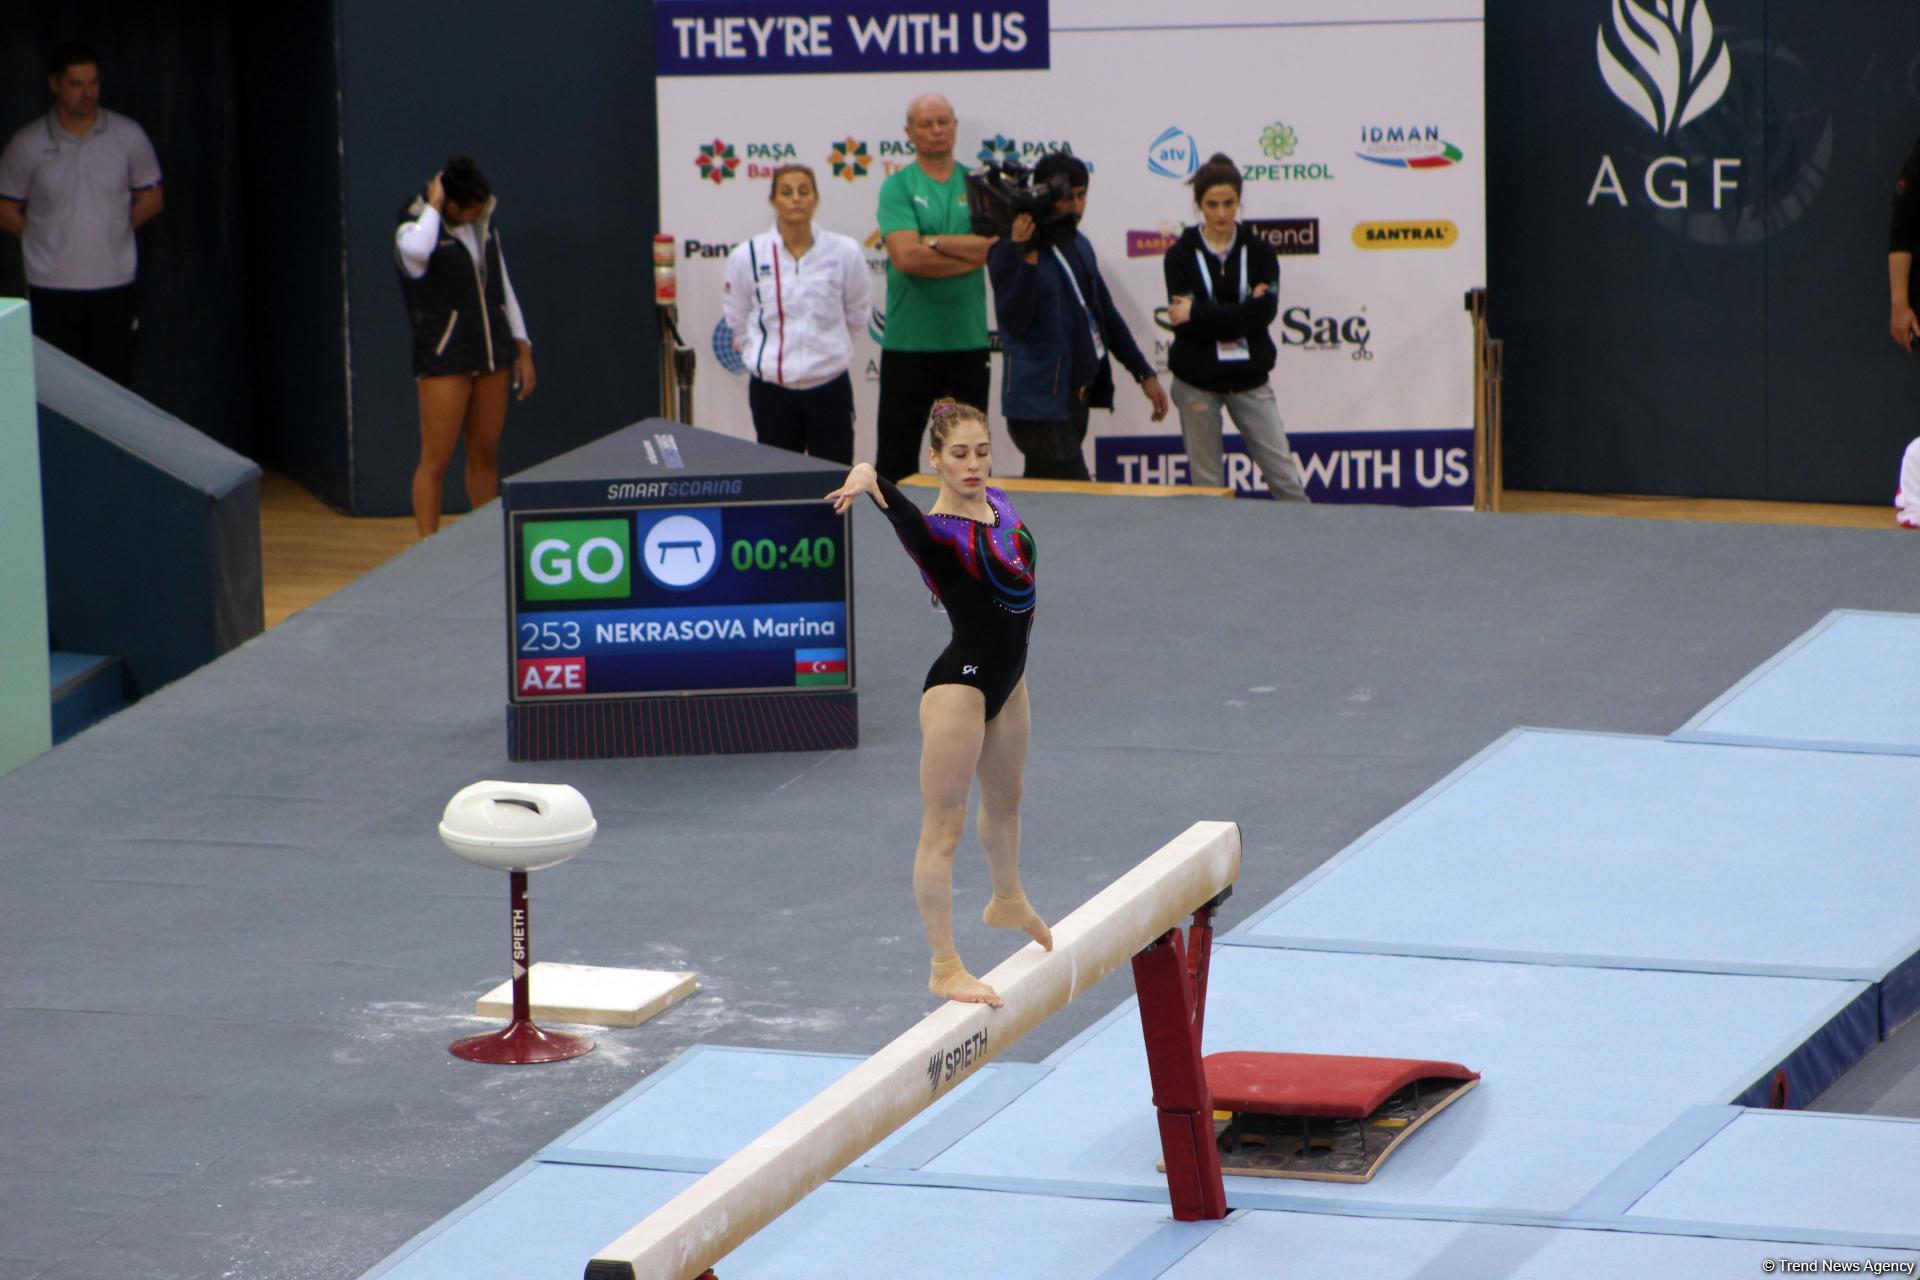 Winners of FIG Artistic Gymnastics World Cup in balance beam exercises named